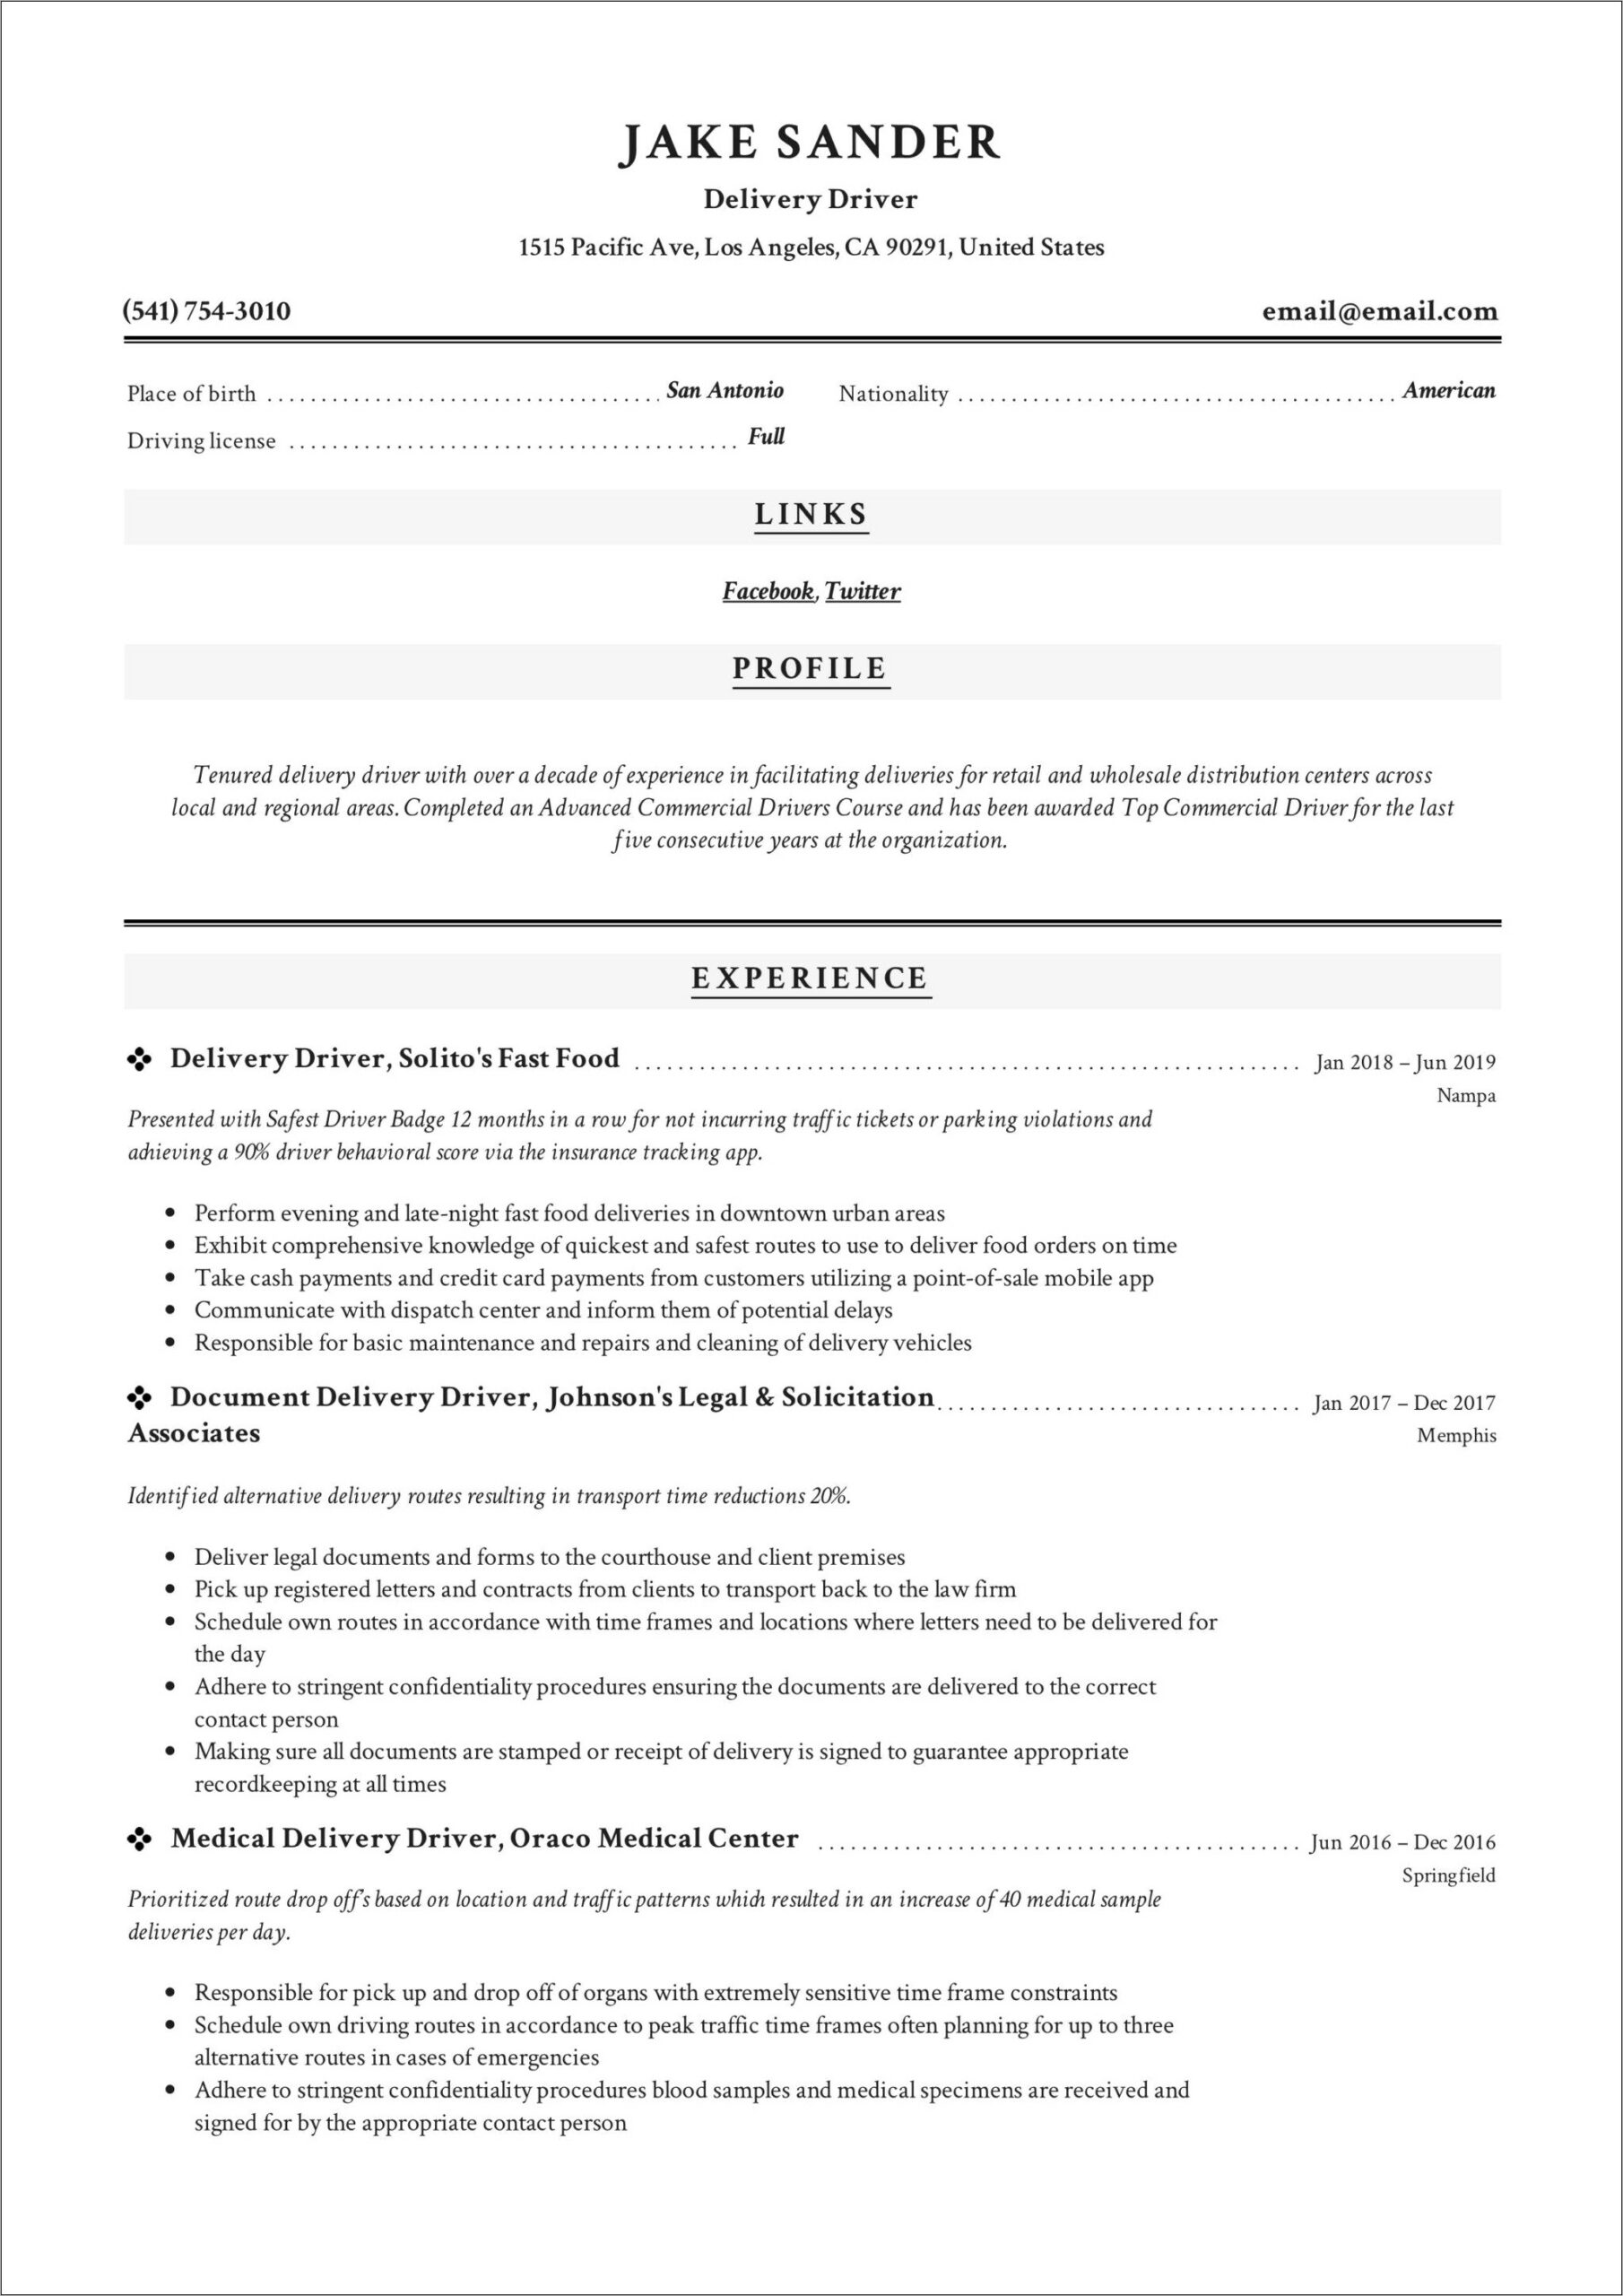 Examples Of Delivery Driver Resumes